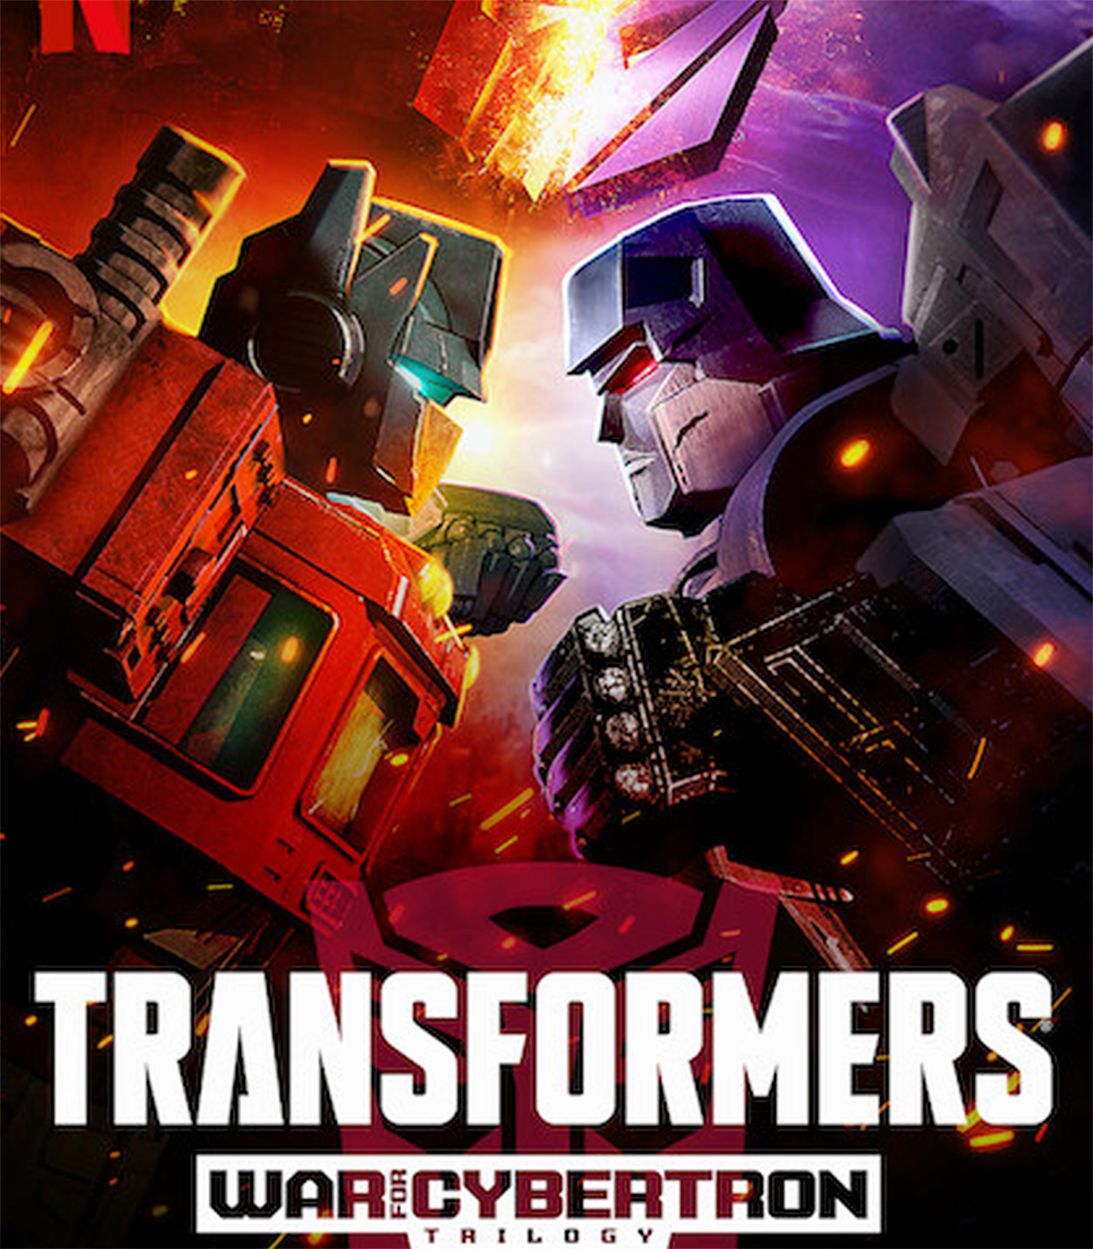 transformers-war-for-cybertron-trilogy-poster-1093